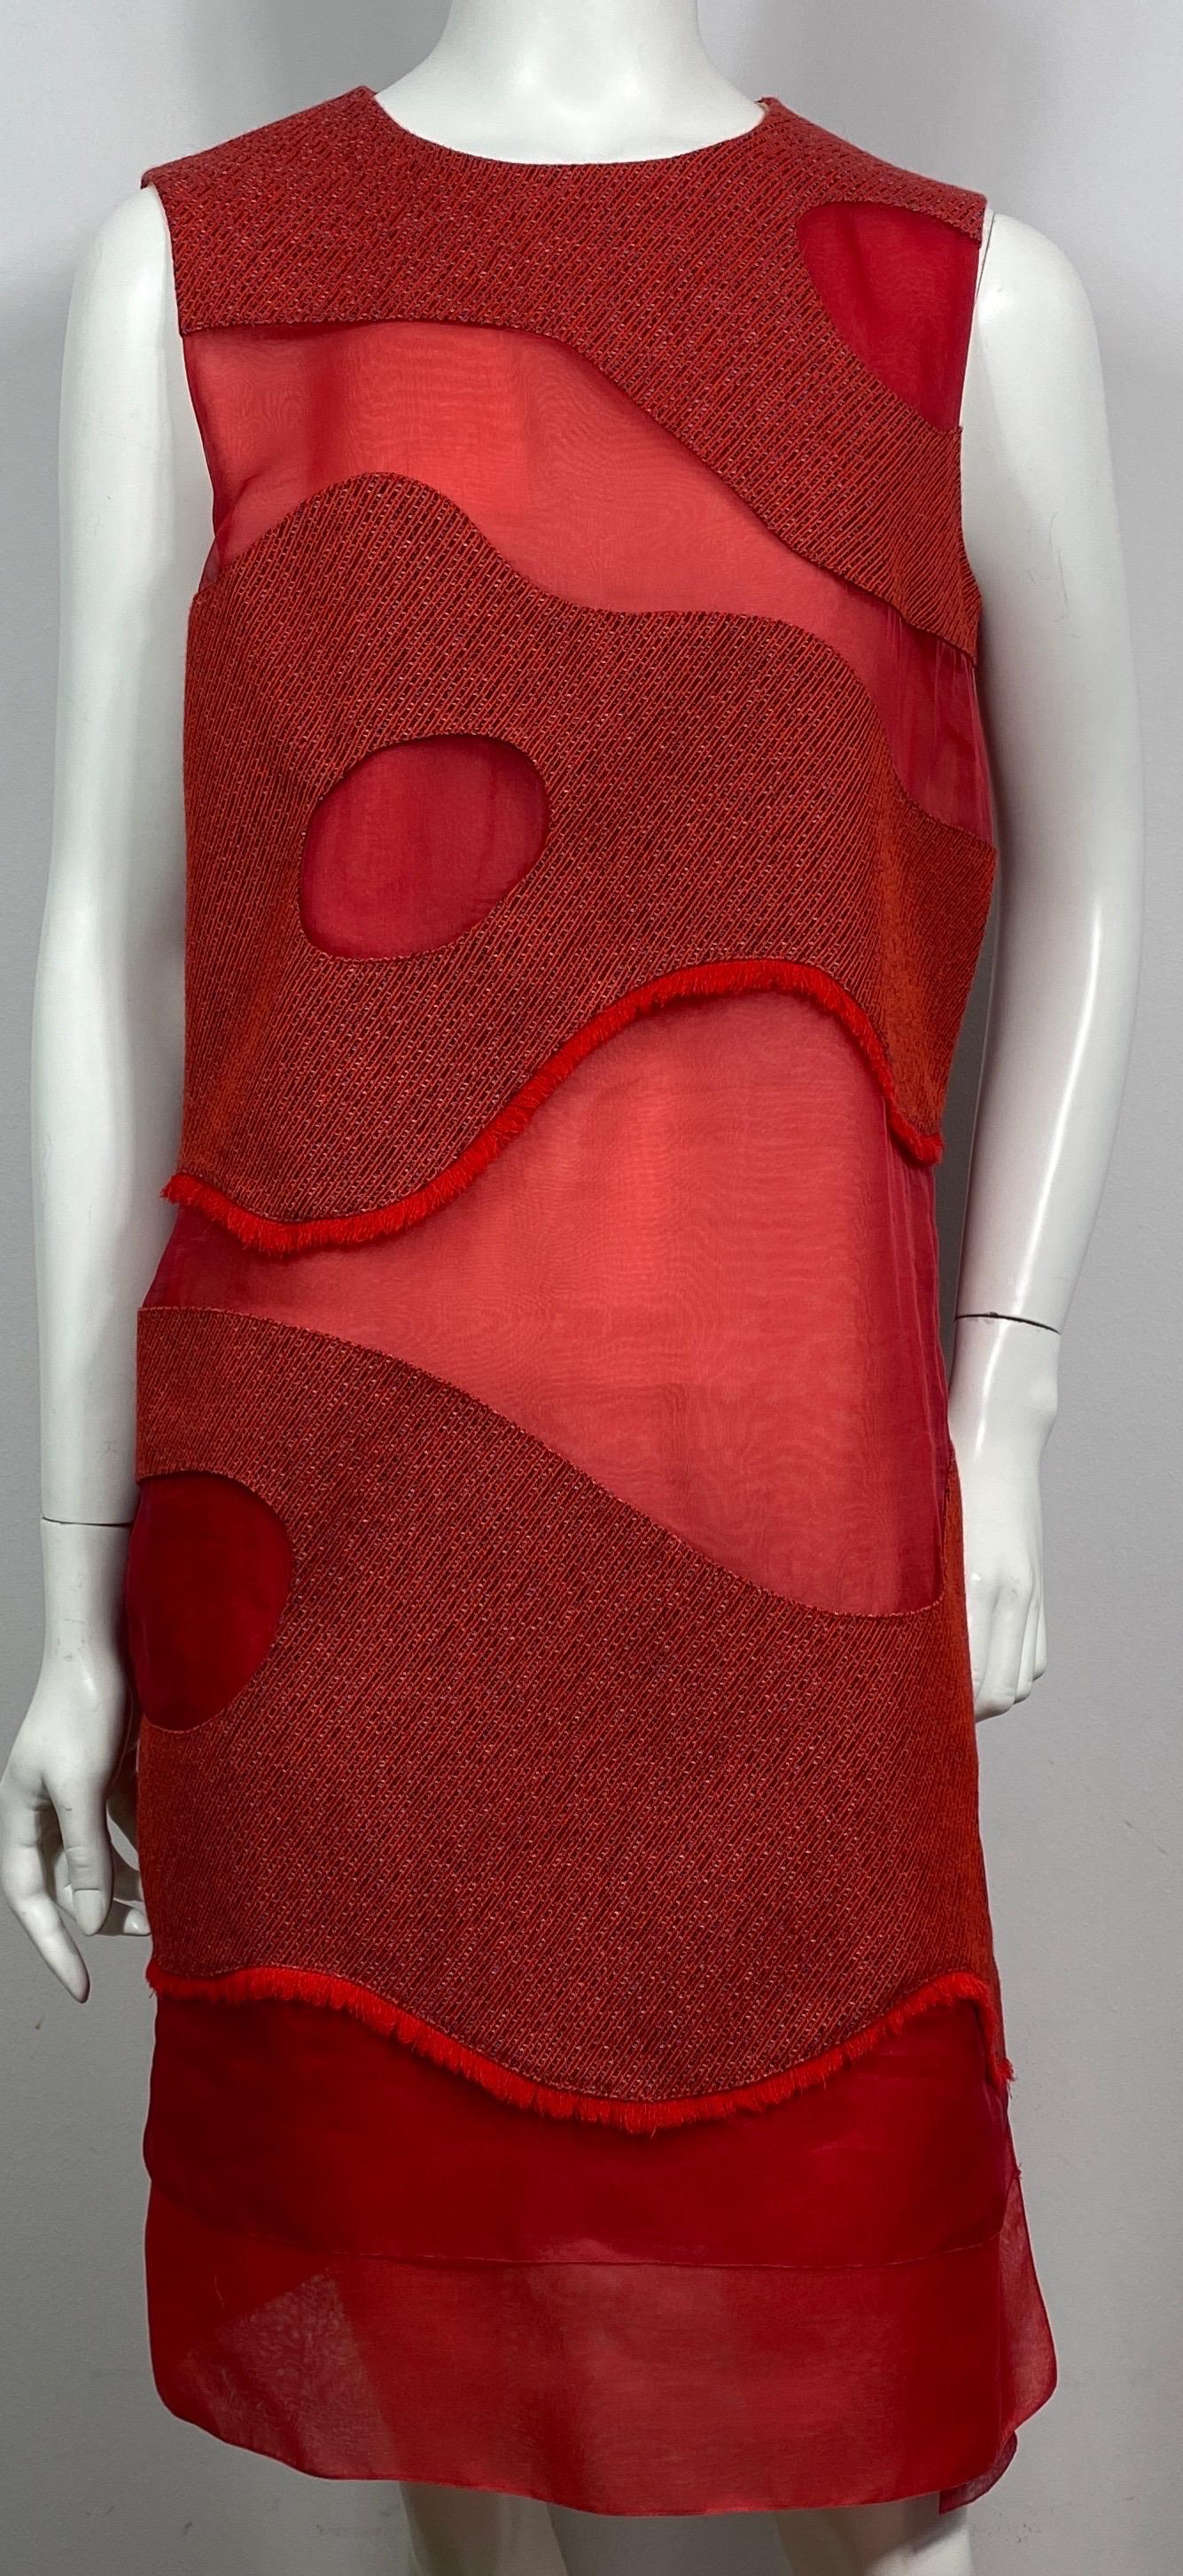 Christian Dior Runway Fall 2015 Red Multi Layer Silk Shift Dress - US Size 8  This spectacular Dior creation is made of 4 layers of silk organza in two different colors (1st two are a light blush color with the next 2 being a bright red silk